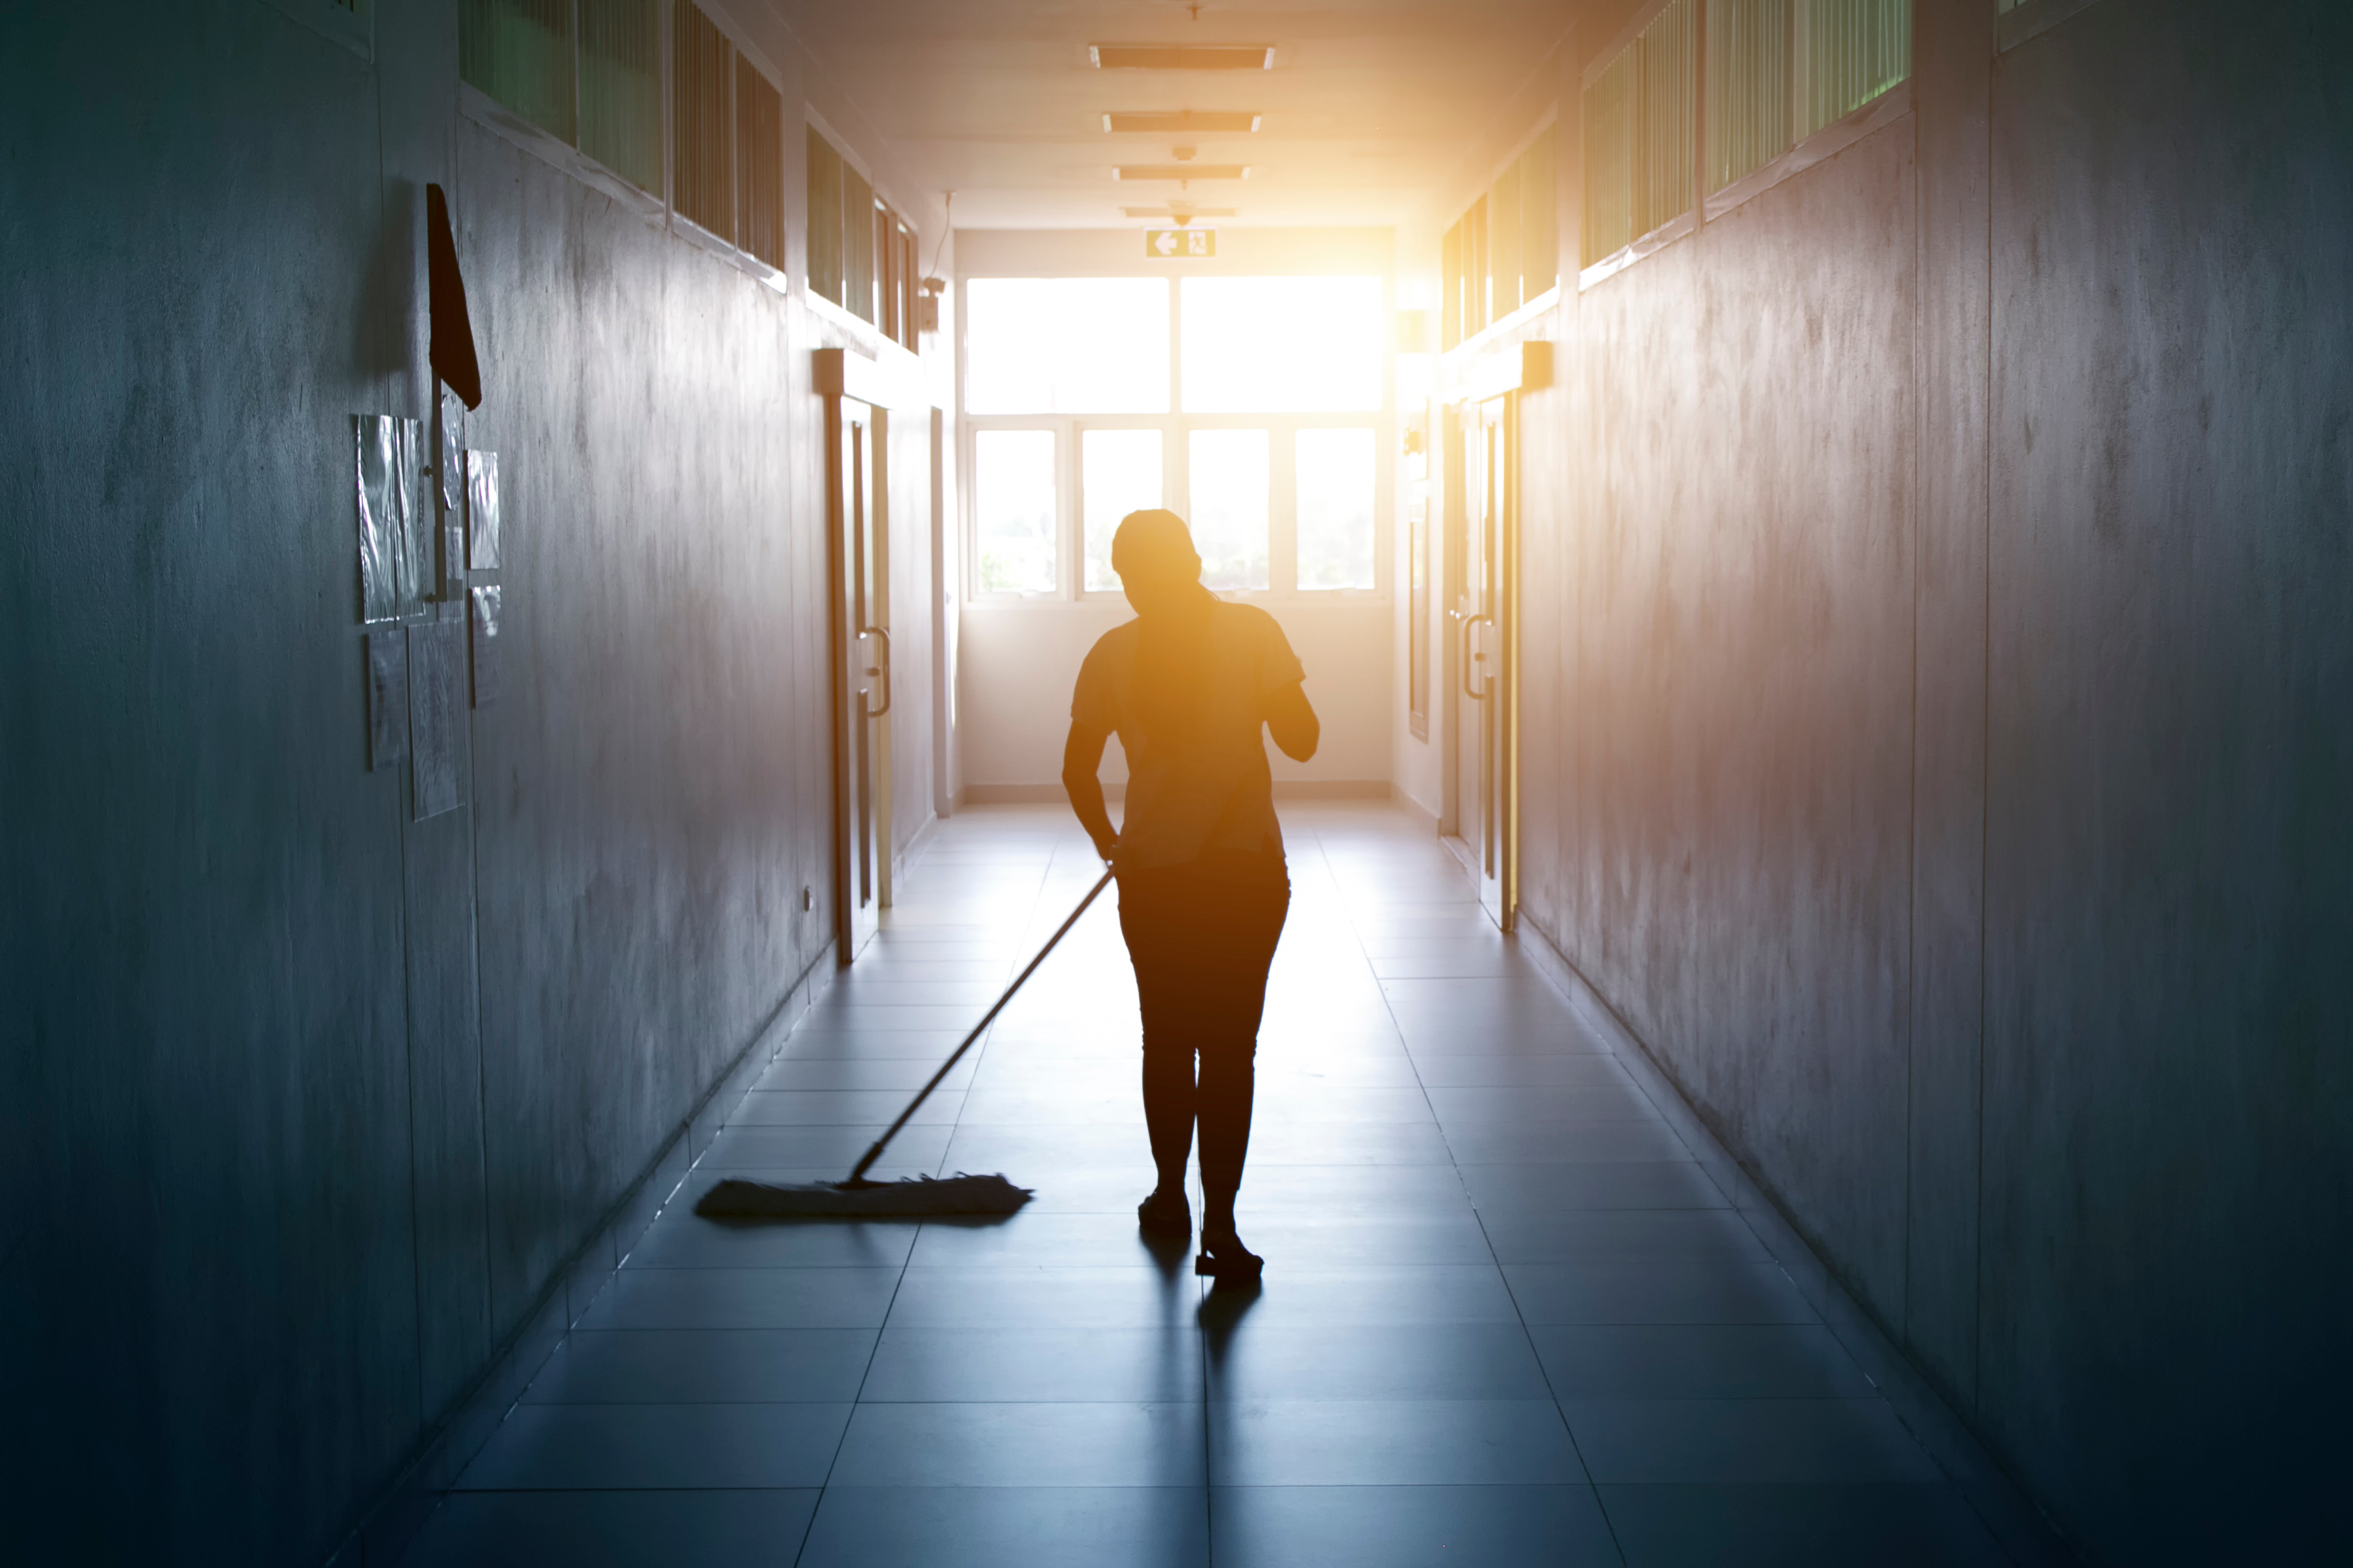 4 Solutions to School Janitorial Staffing Challenges